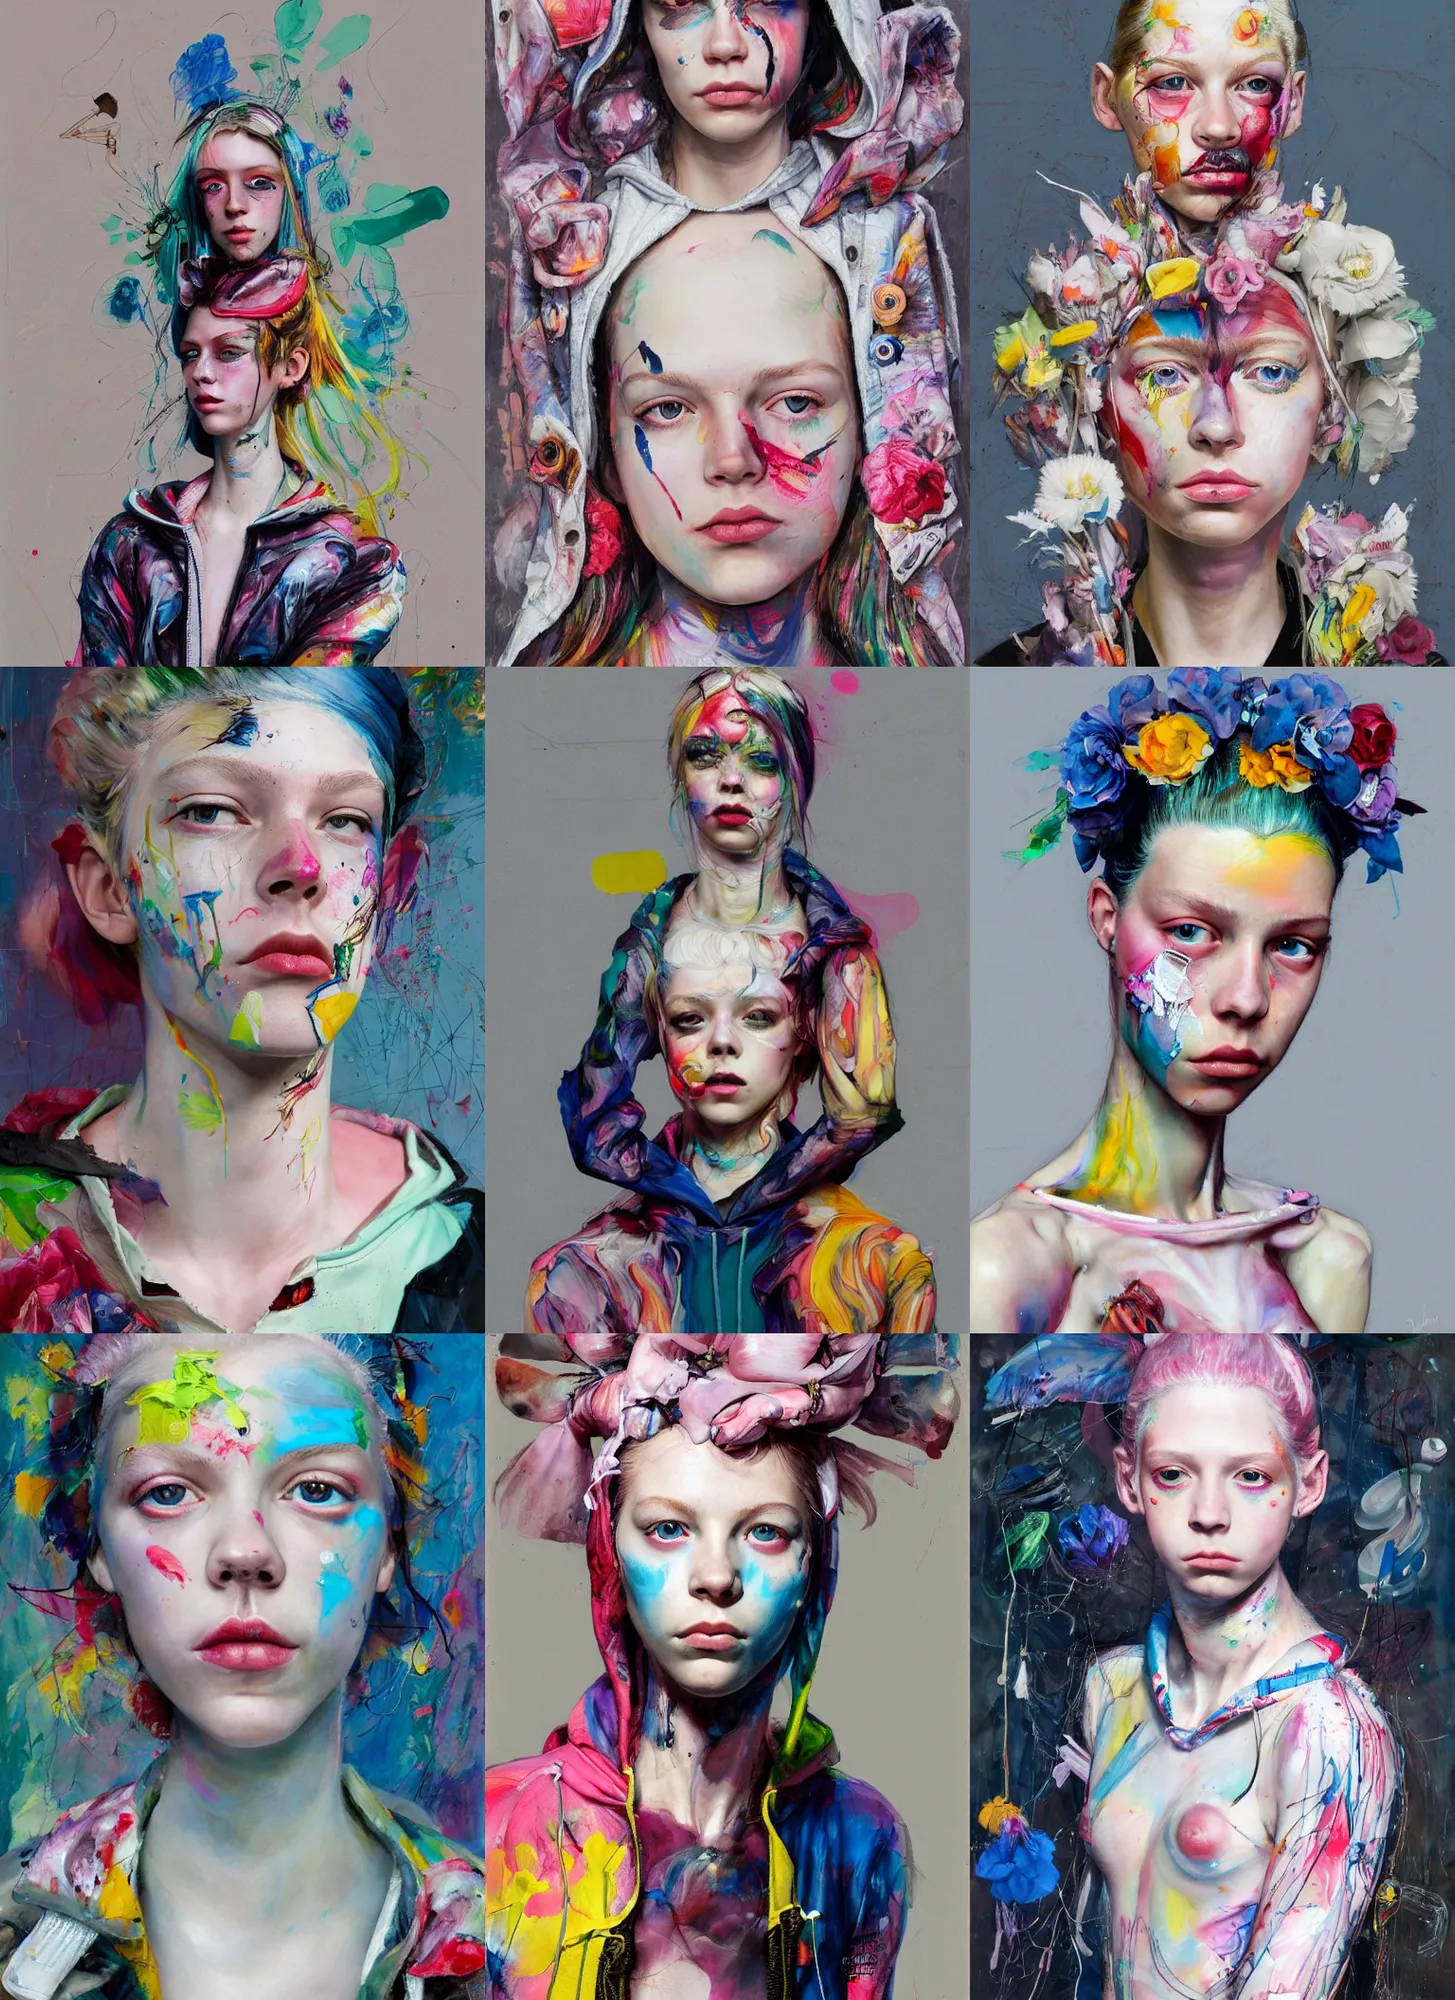 Prompt: 2 5 year old hunter schafer in the style of martine johanna and! jenny saville!, wearing a hoodie, standing in a township street, street fashion outfit, haute couture fashion shoot, mascara, full figure painting by john berkey, david choe, ryan hewett, decorative flowers, 2 4 mm, die antwoord yolandi visser